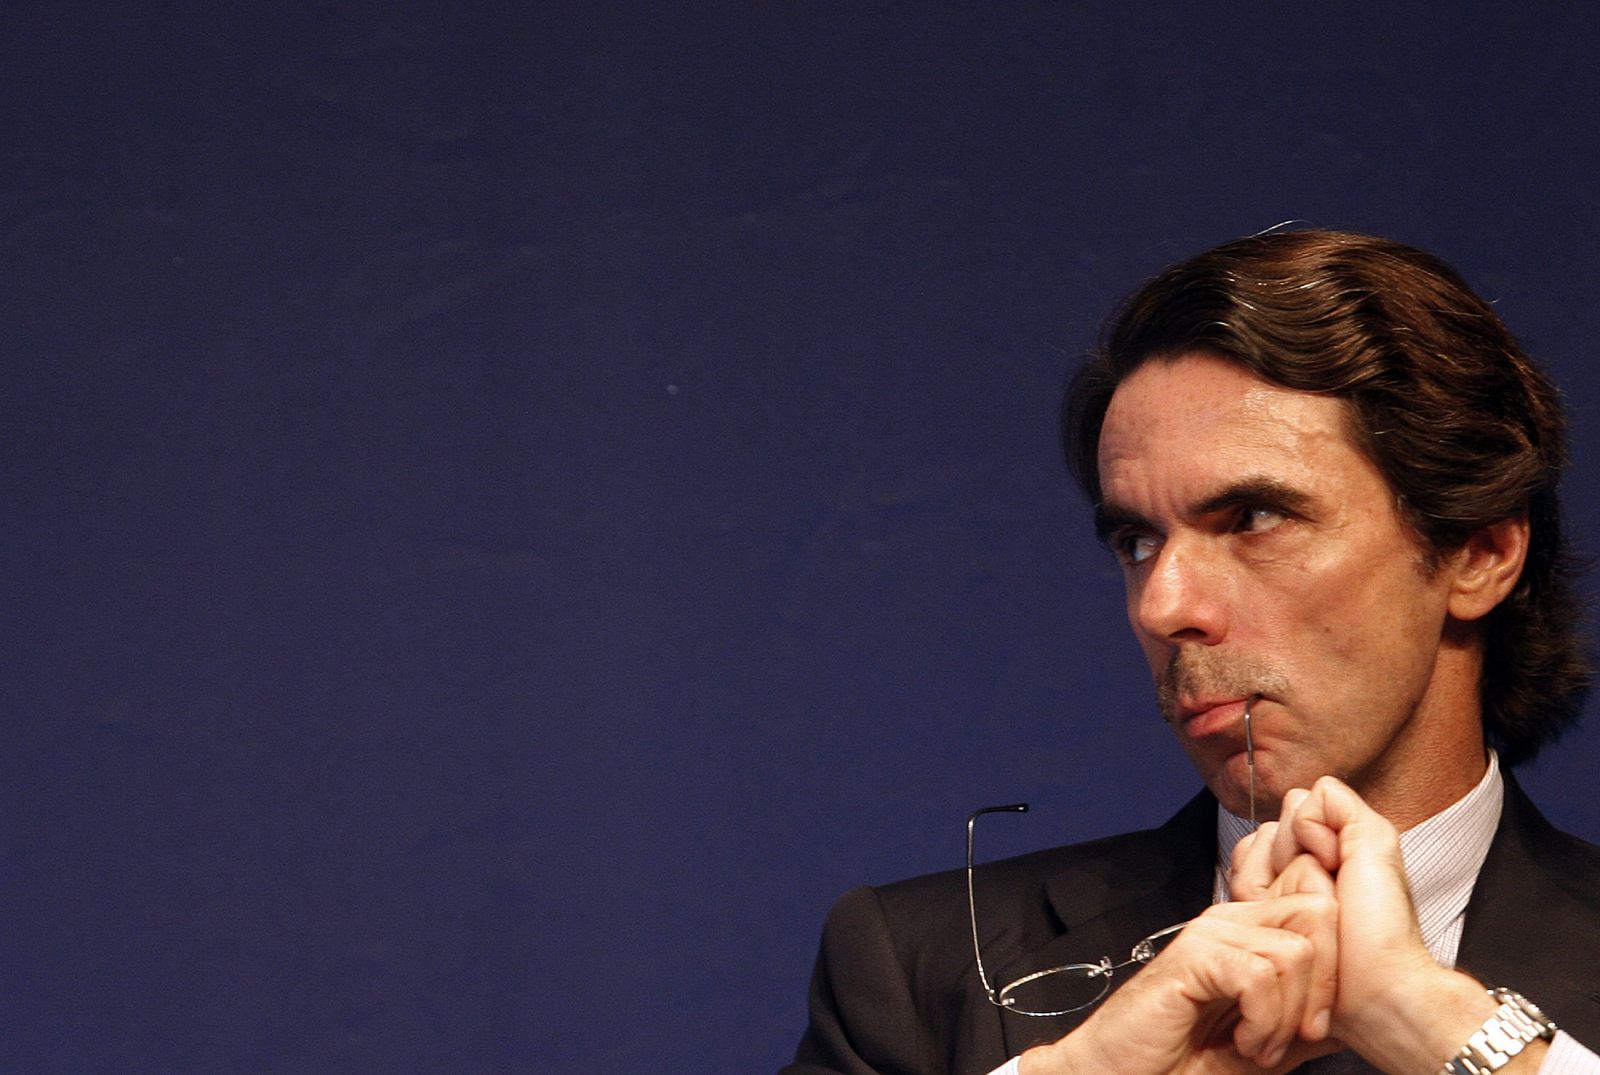 Former Spanish PM Aznar listens to a speaker during a conference on globalization in Estoril, near Lisbon